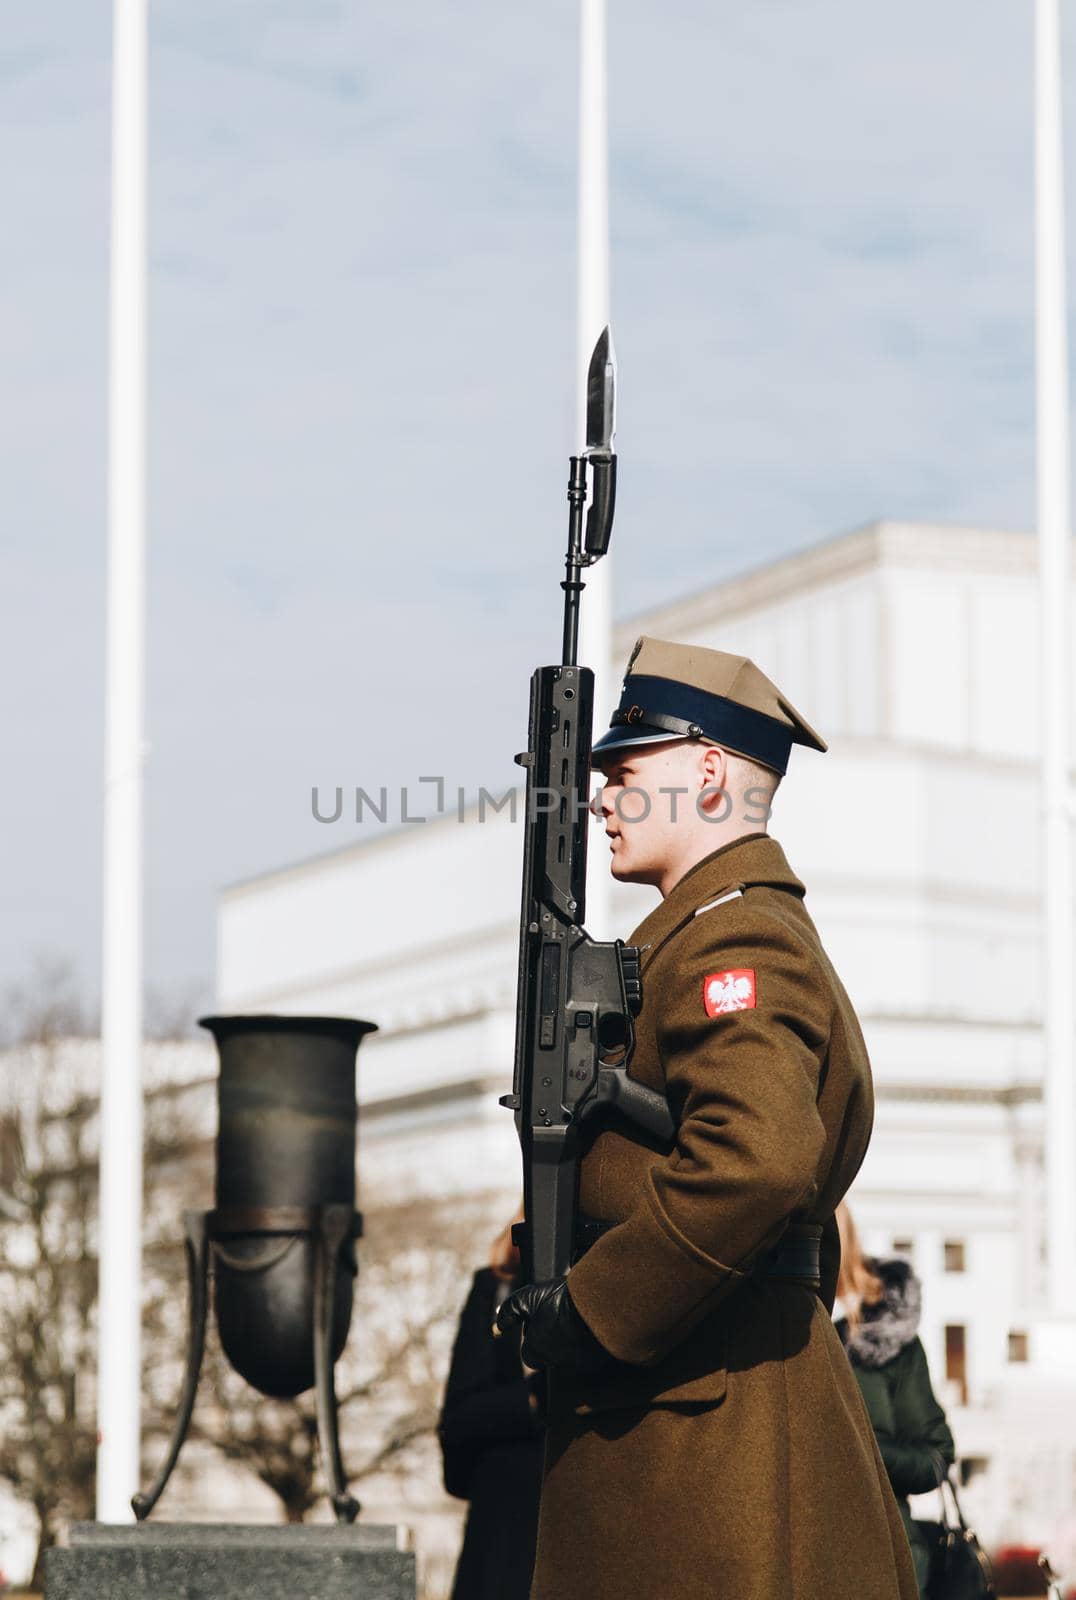 WARSAW, POLAND - Mar, 2018 Guard of honor near Tomb of the Unknown Soldier in Warsaw, Poland.